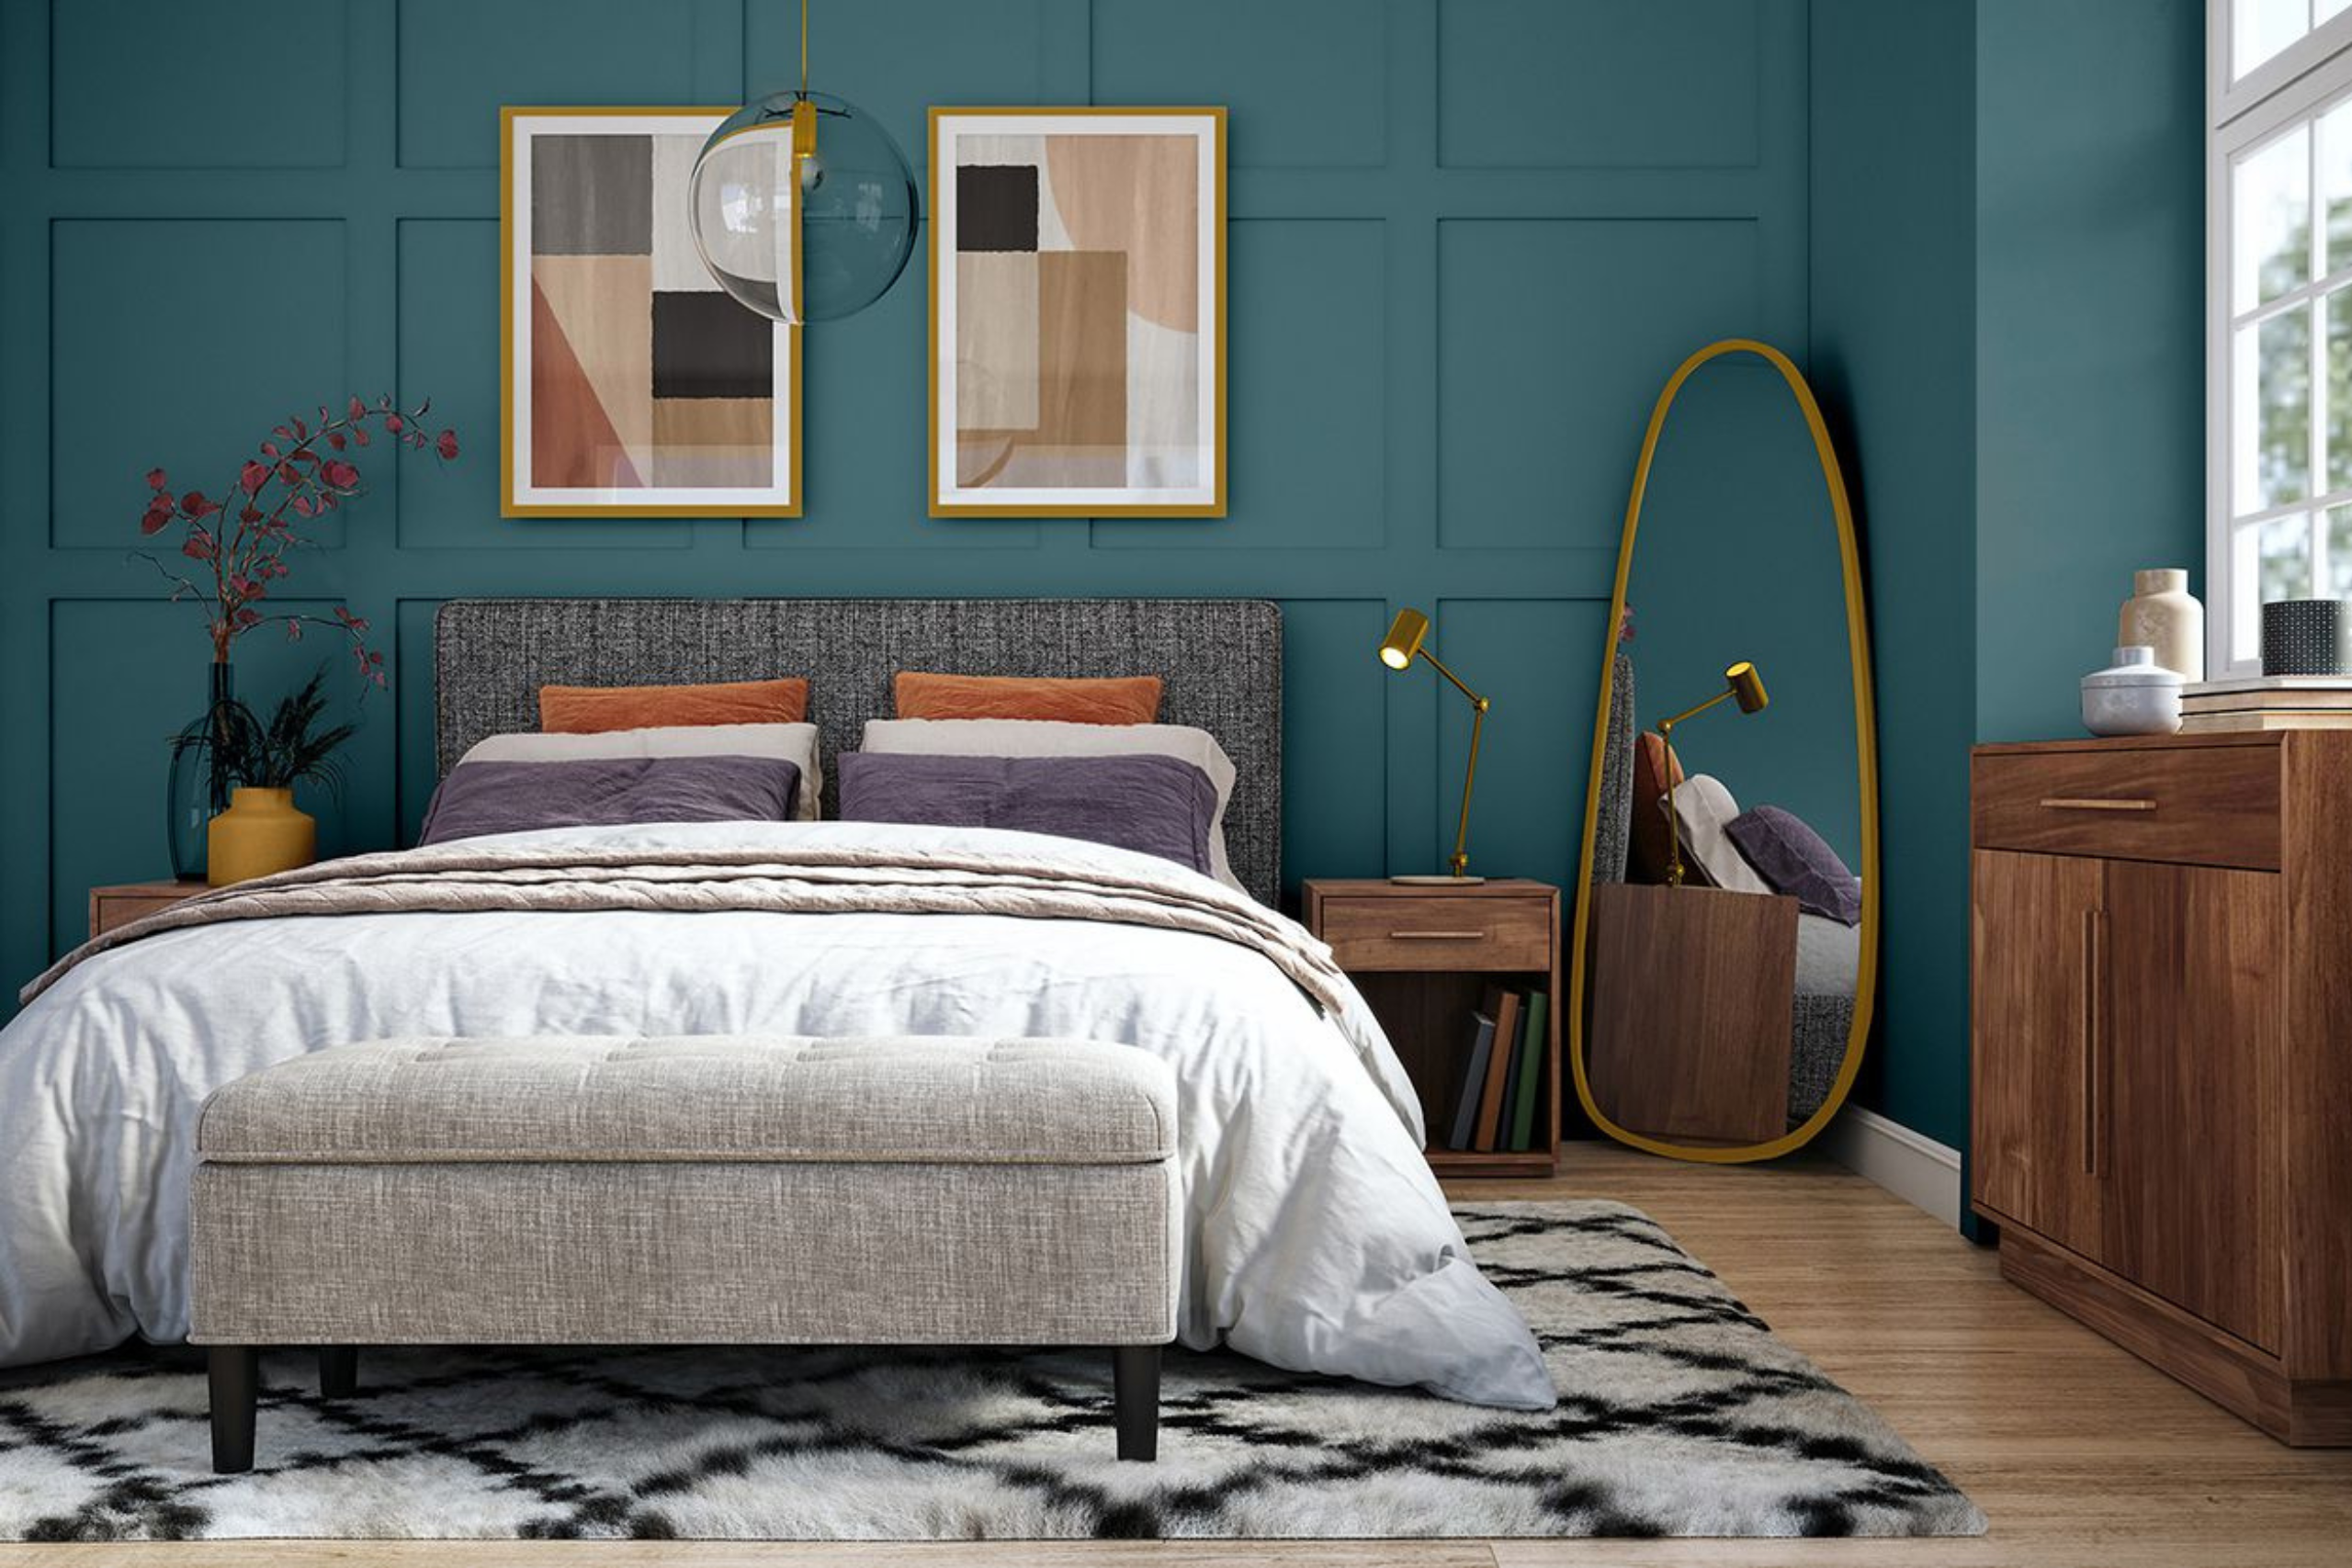 A bold bedroom with a blue feature wall is a trend for interior colour choices this year.